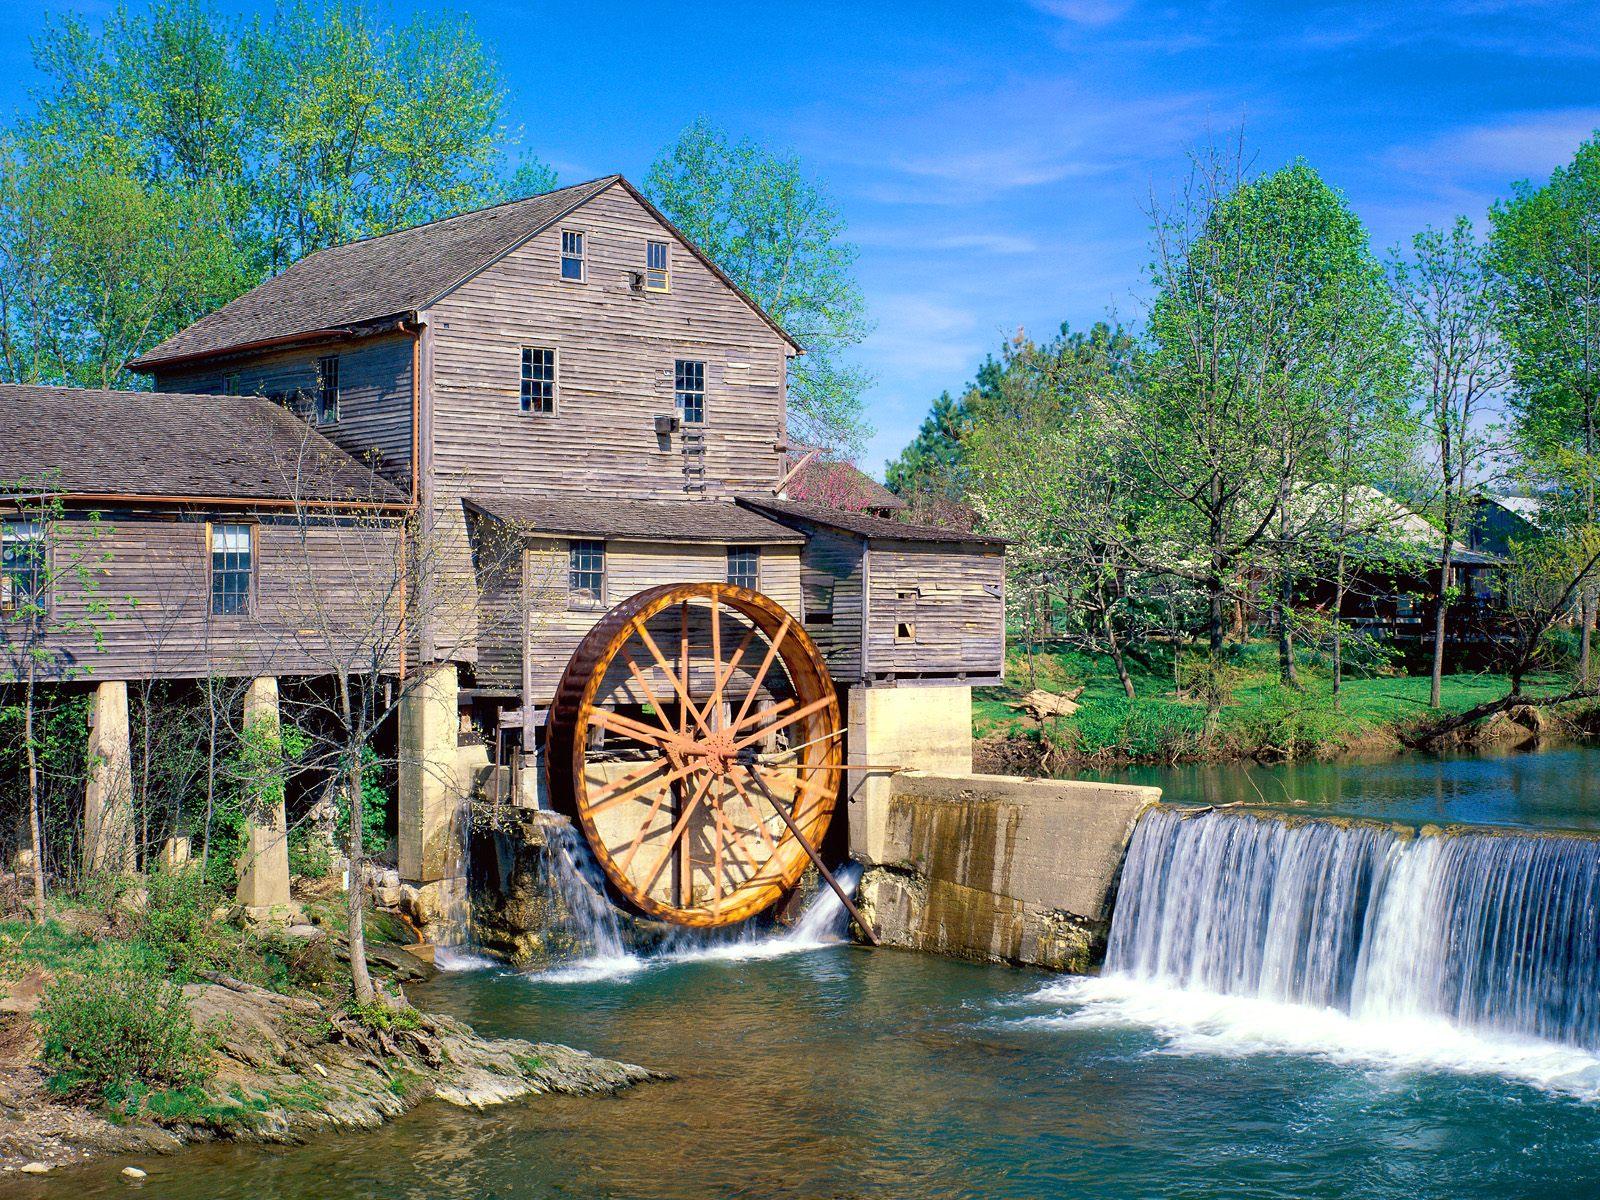 HDmax - Old Mill, Pigeon Forge, Tennessee » Tapety Kraje HD